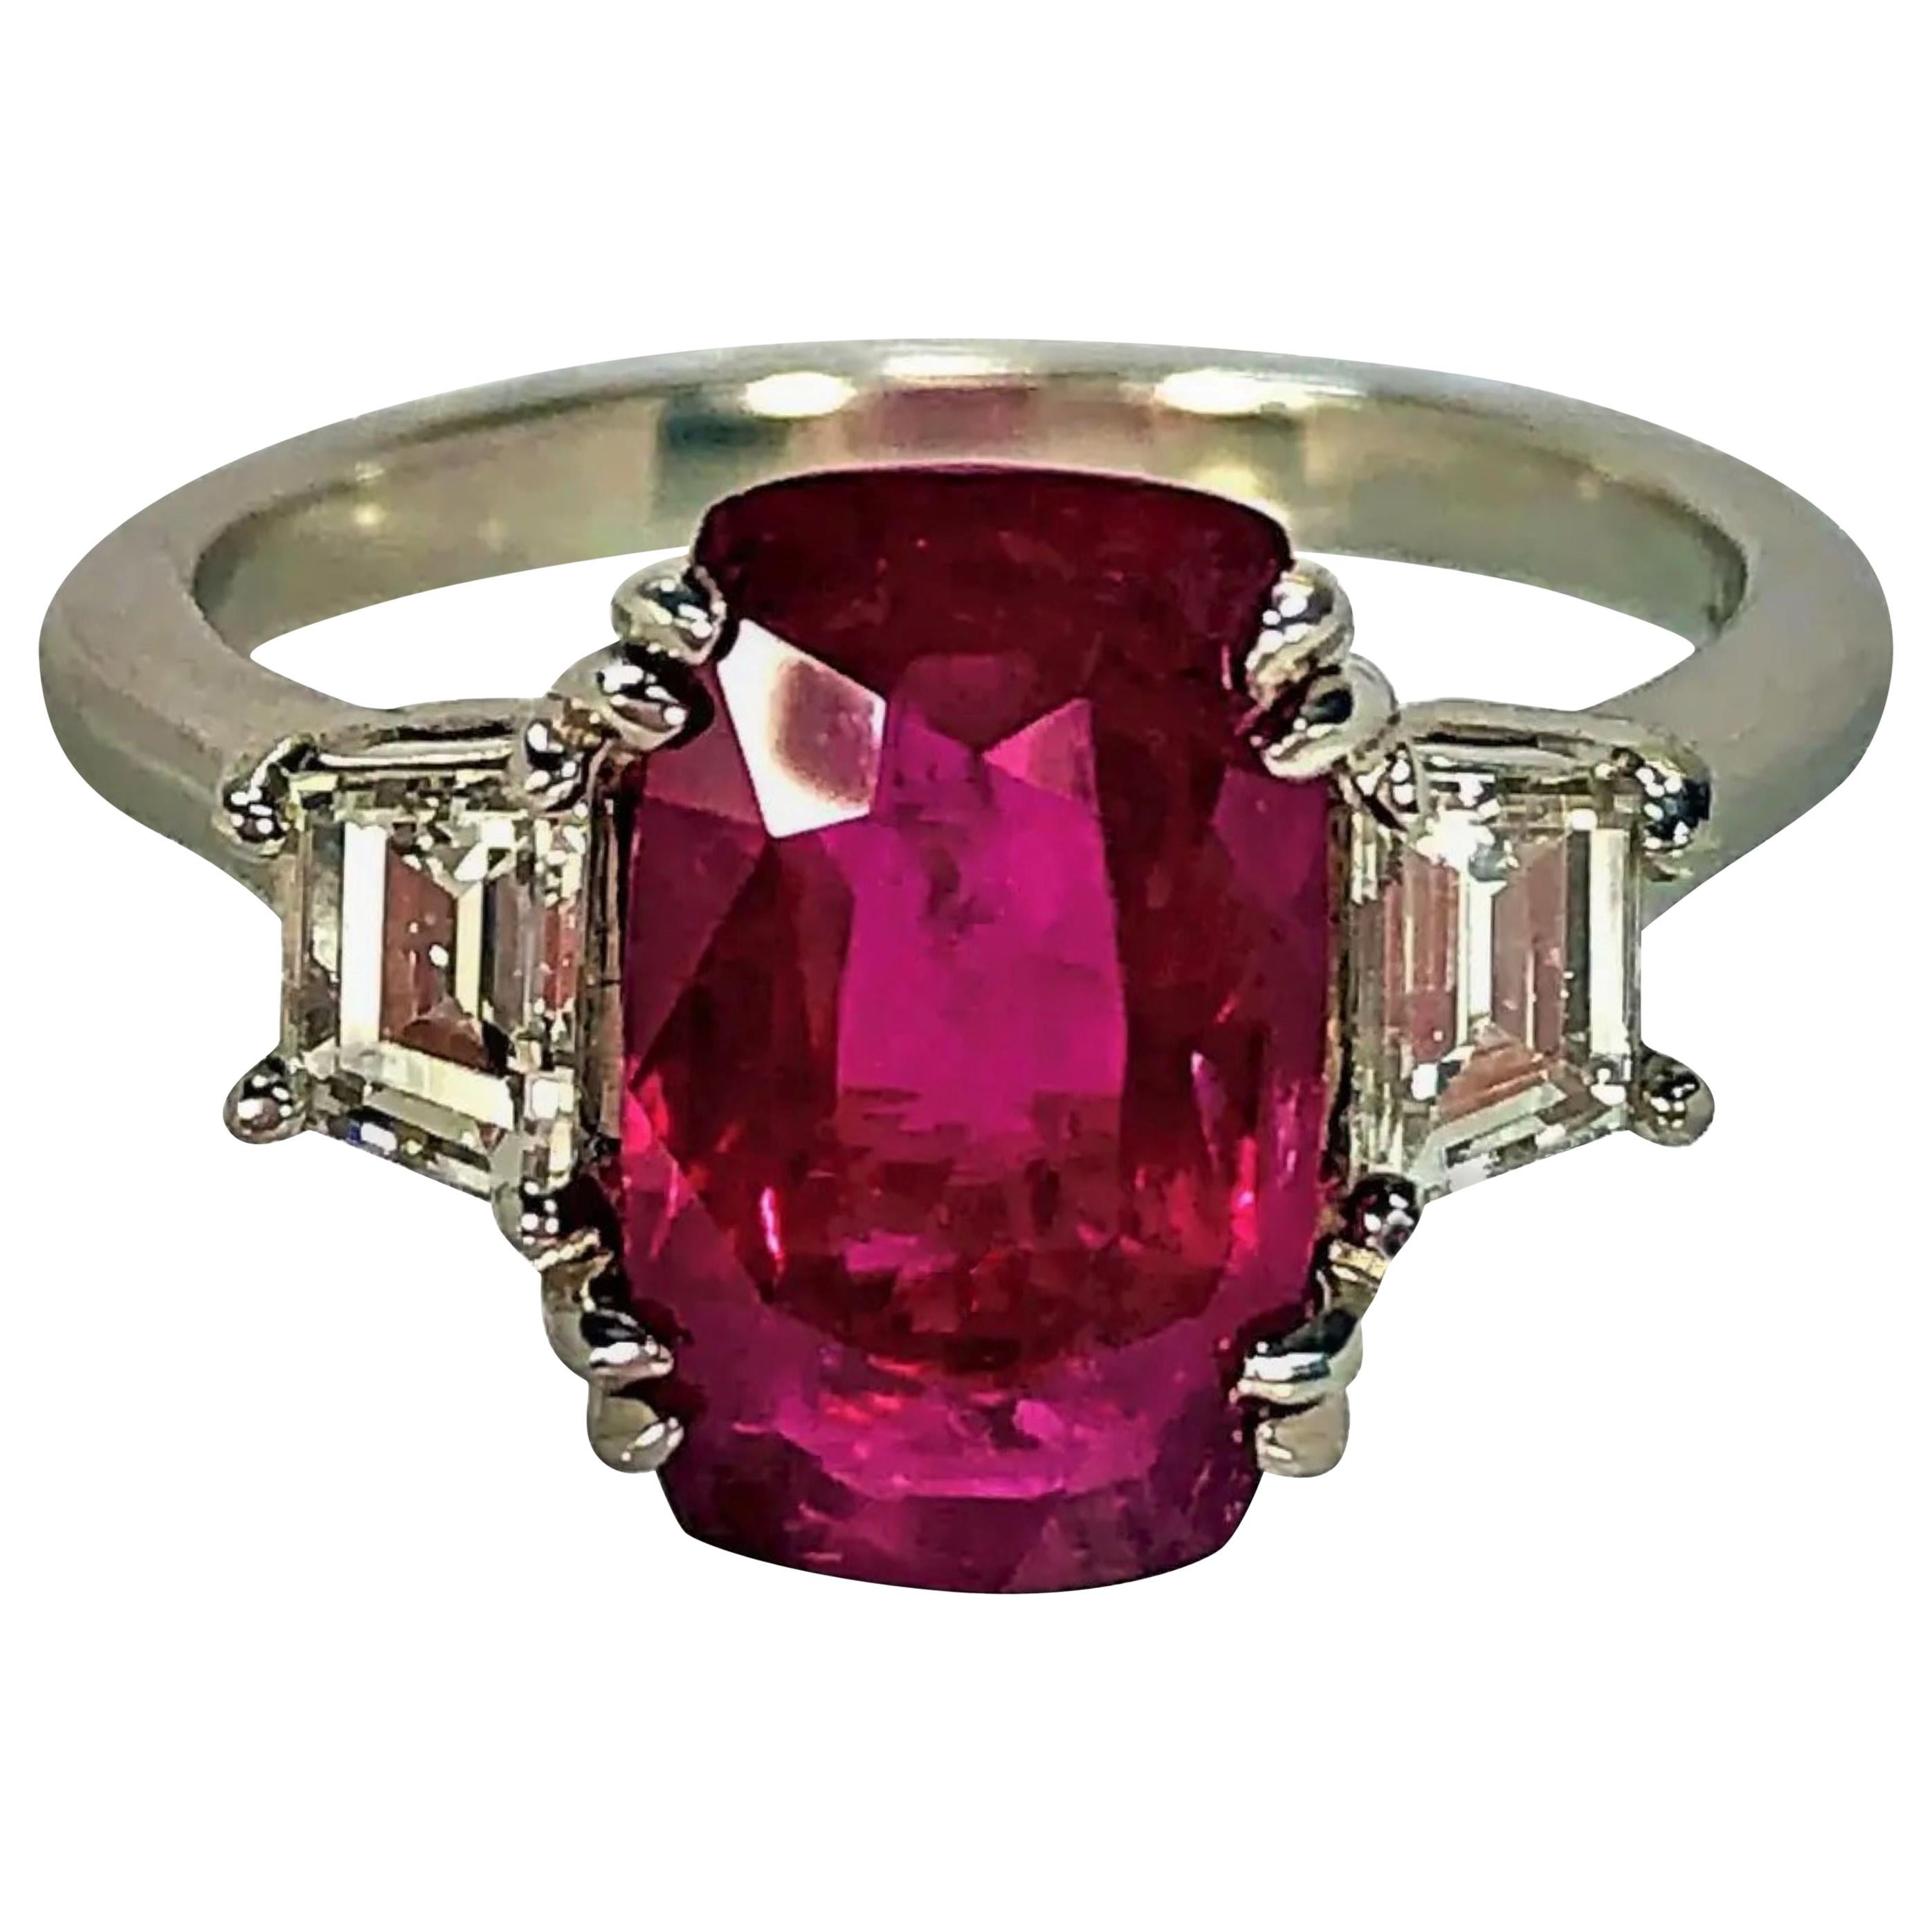 4.07 Carat Mozambique Ruby and Diamond Three-Stone Ring Set in Platinum